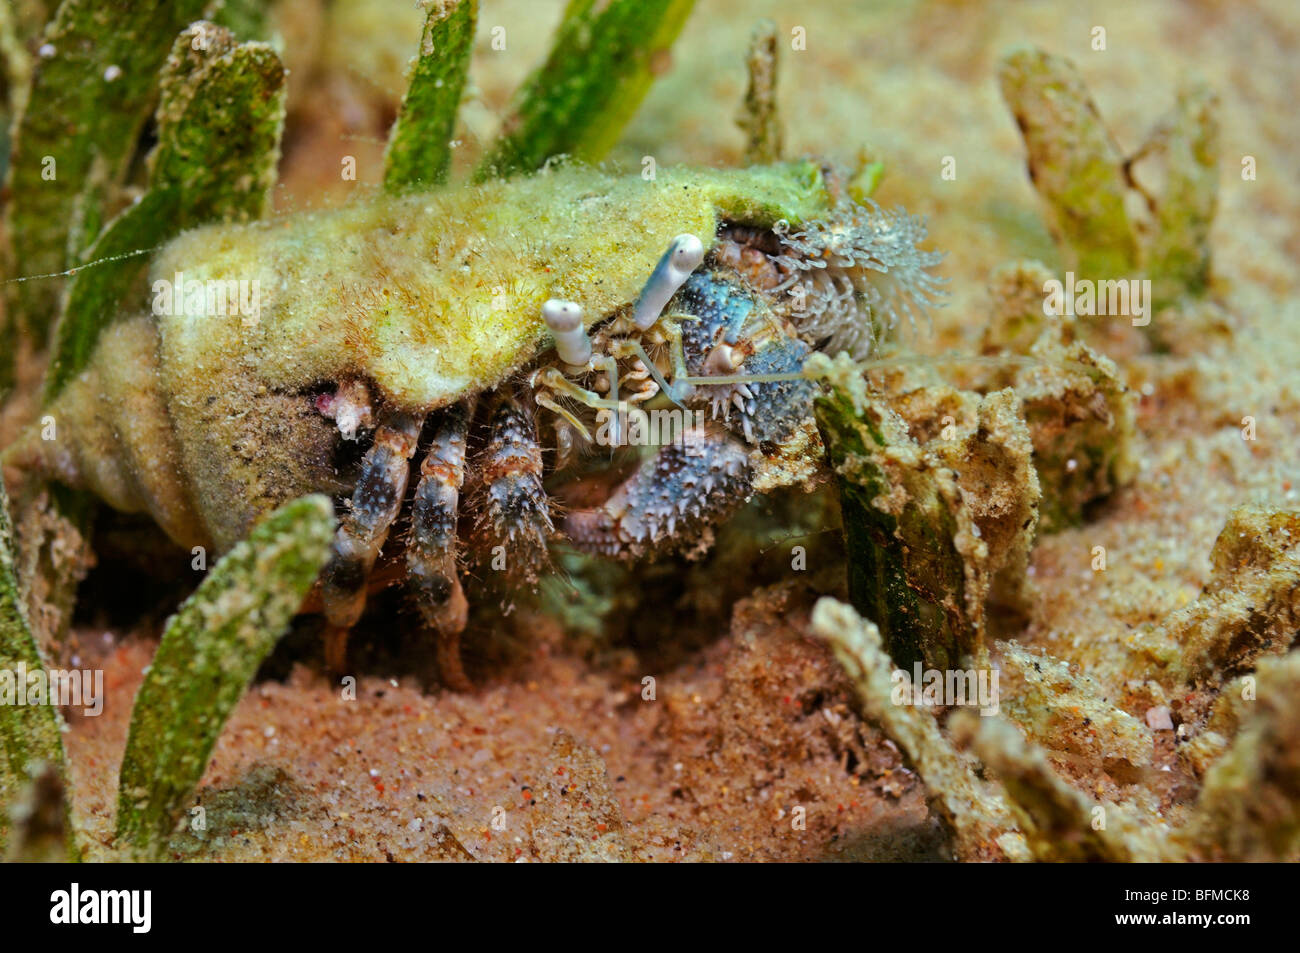 Reef hermit crab, Dardanus lagopodes, in cone shell with attached anemone. 'Red Sea' Stock Photo